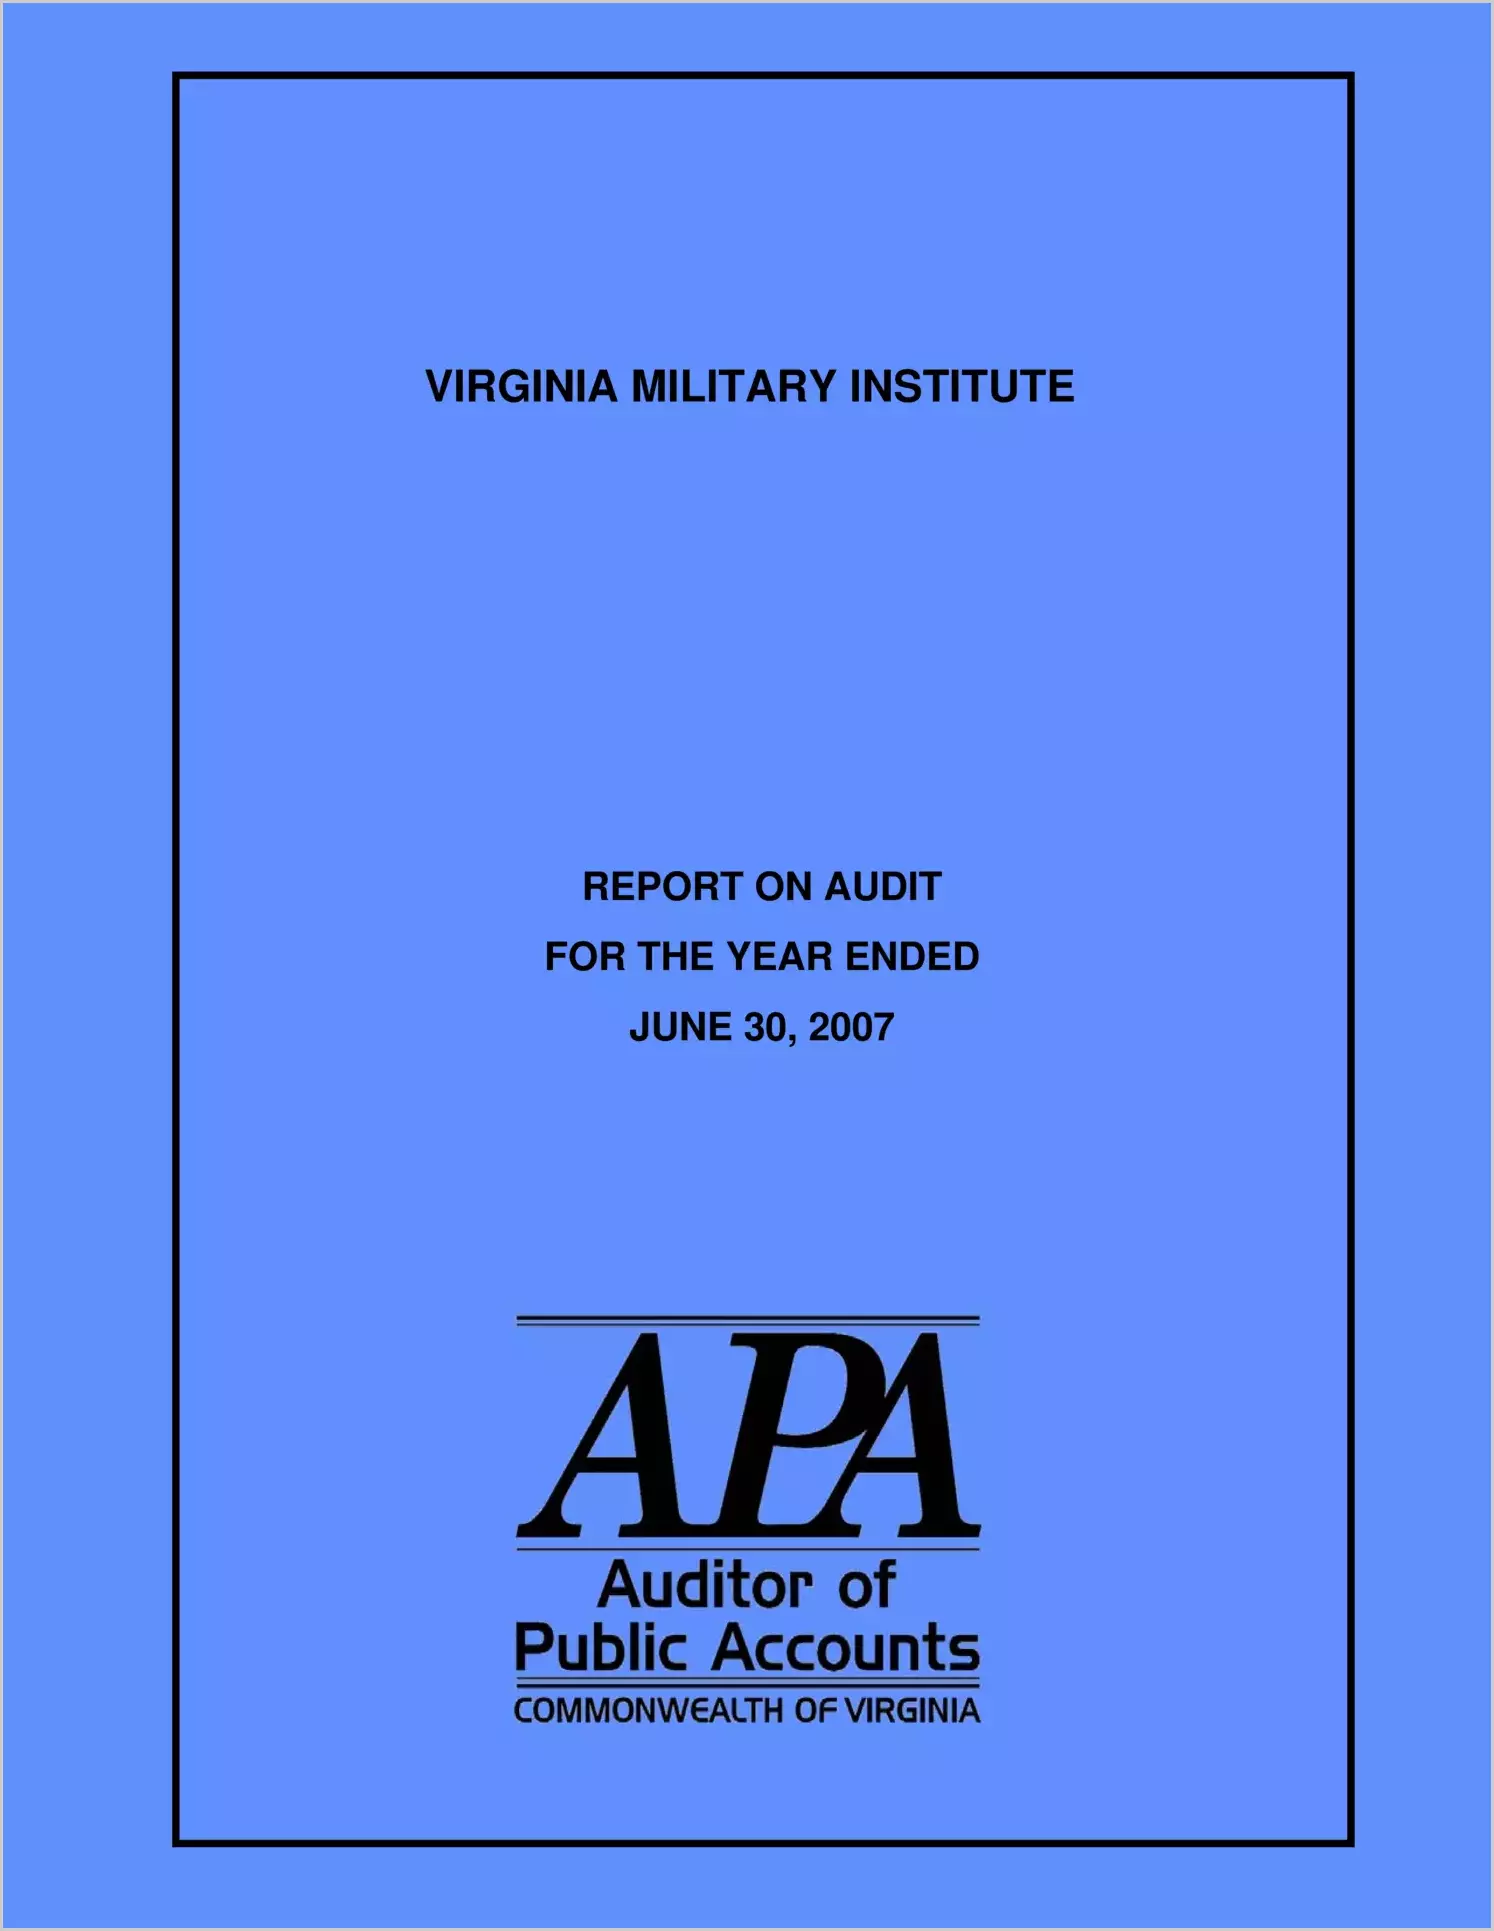 Virginia Military Institute report on audit for the year ended June 30, 2007